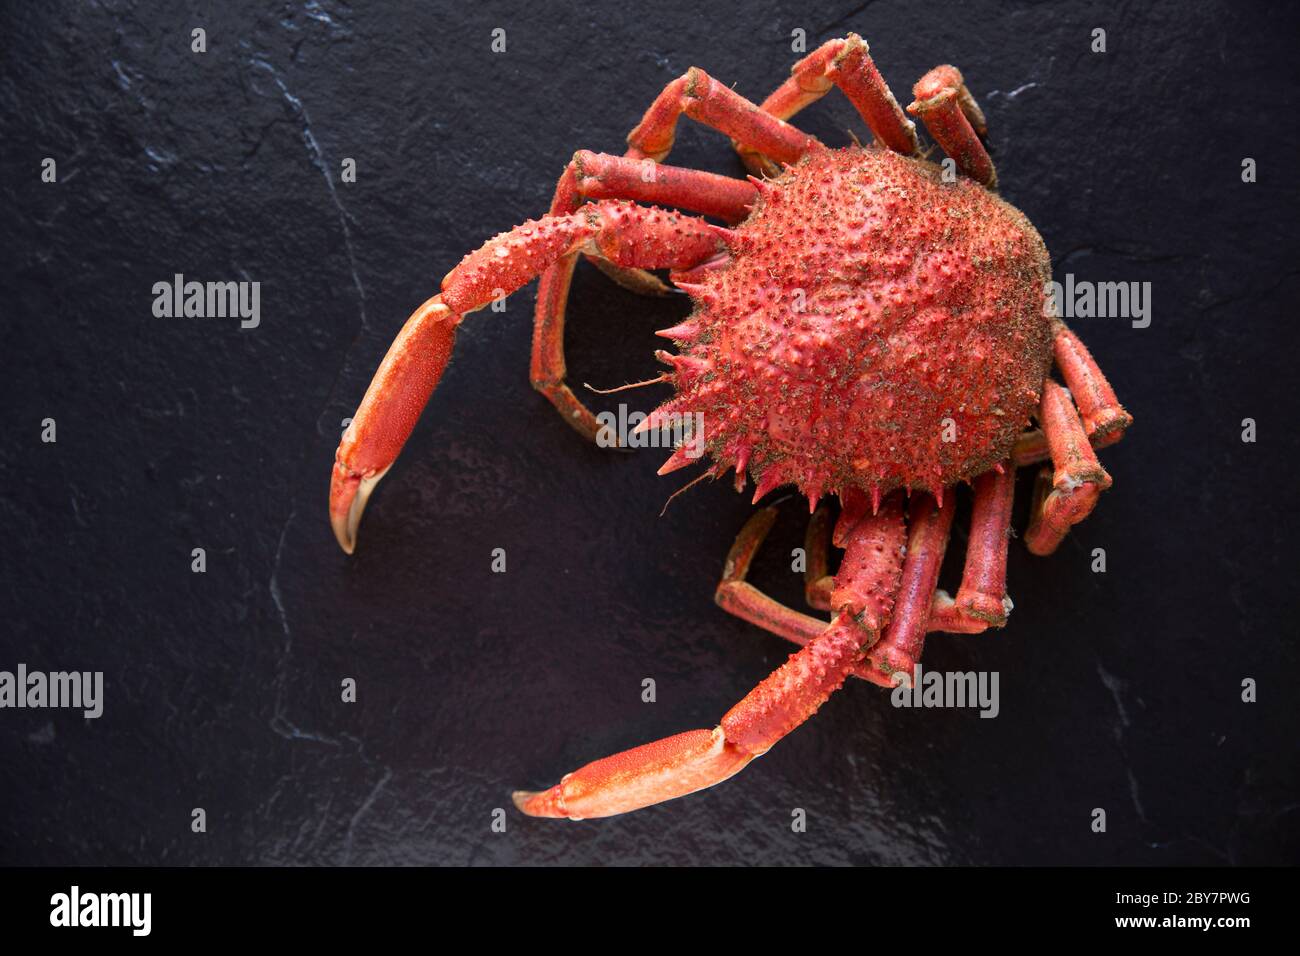 A boiled, cooked spider crab, Maja brachydactyla, caught in the English Channel. Dorset England UK GB Stock Photo